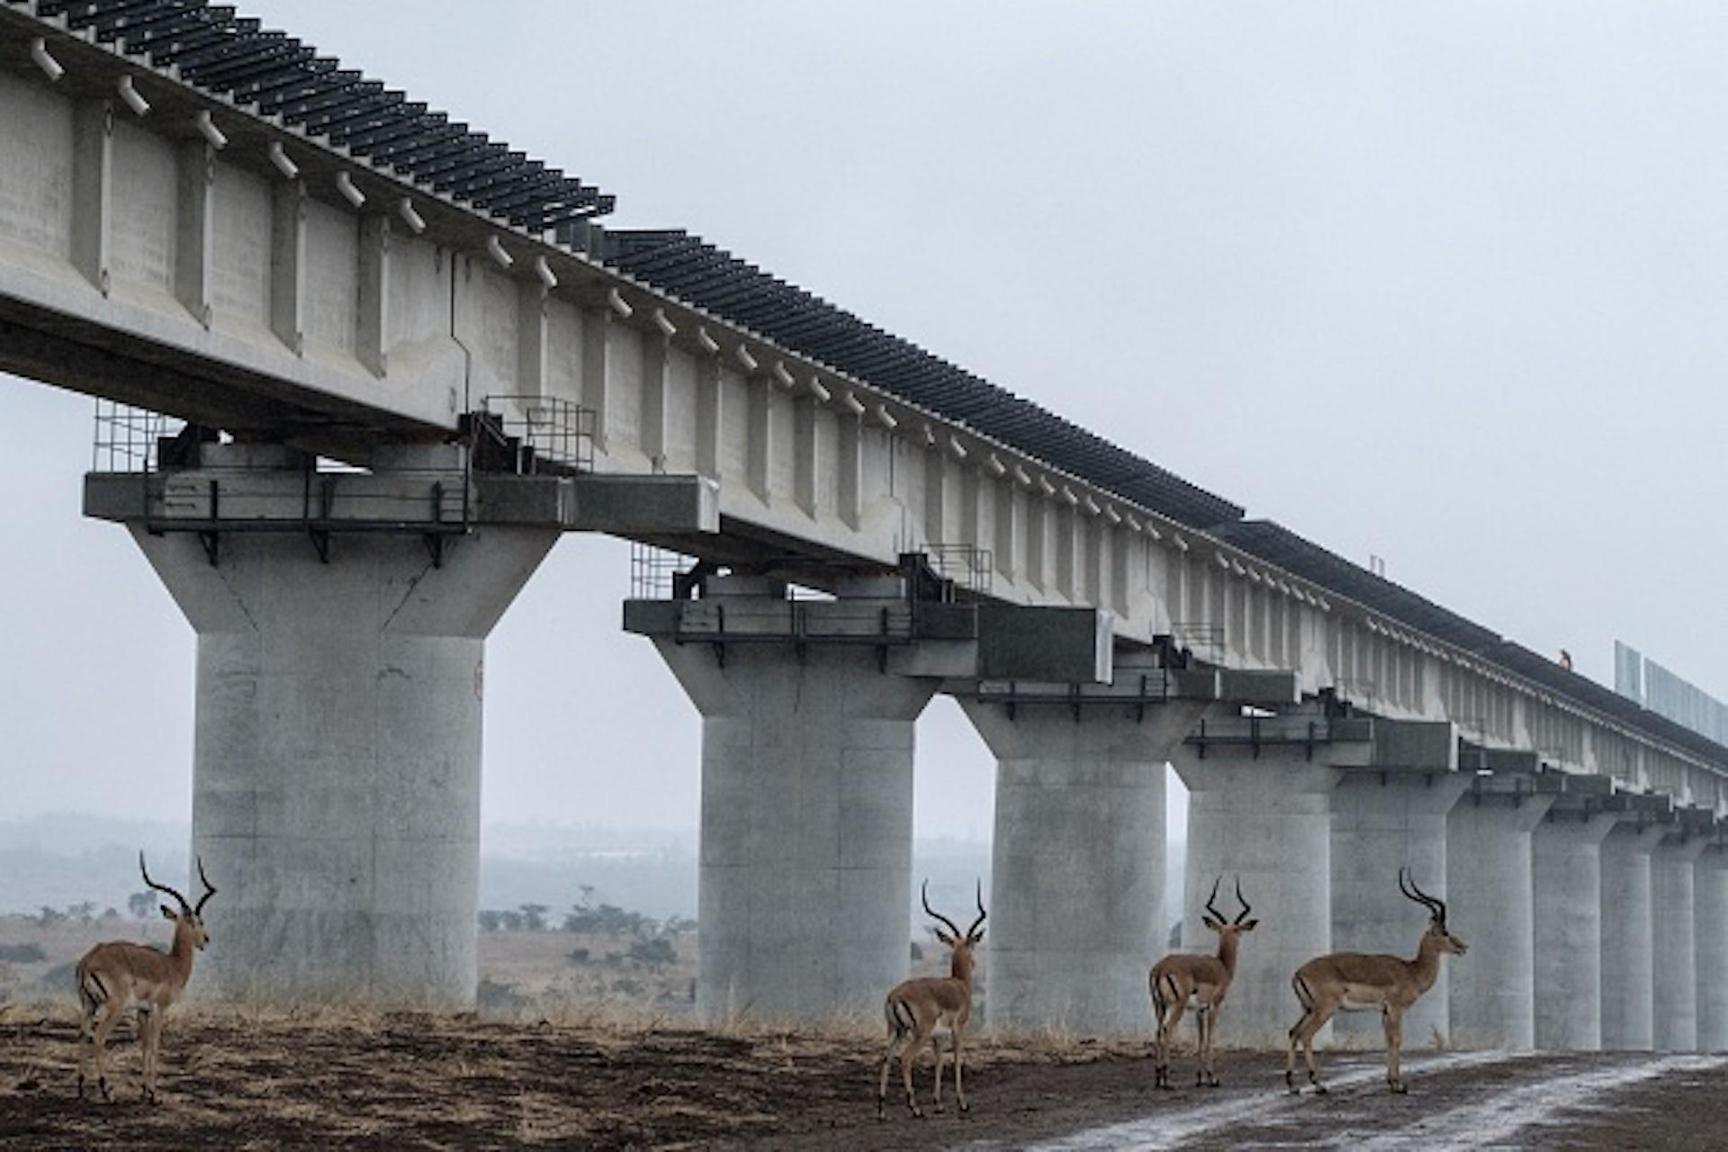 China in Africa: Kenya railway study shows investment projects aren’t a one-way street